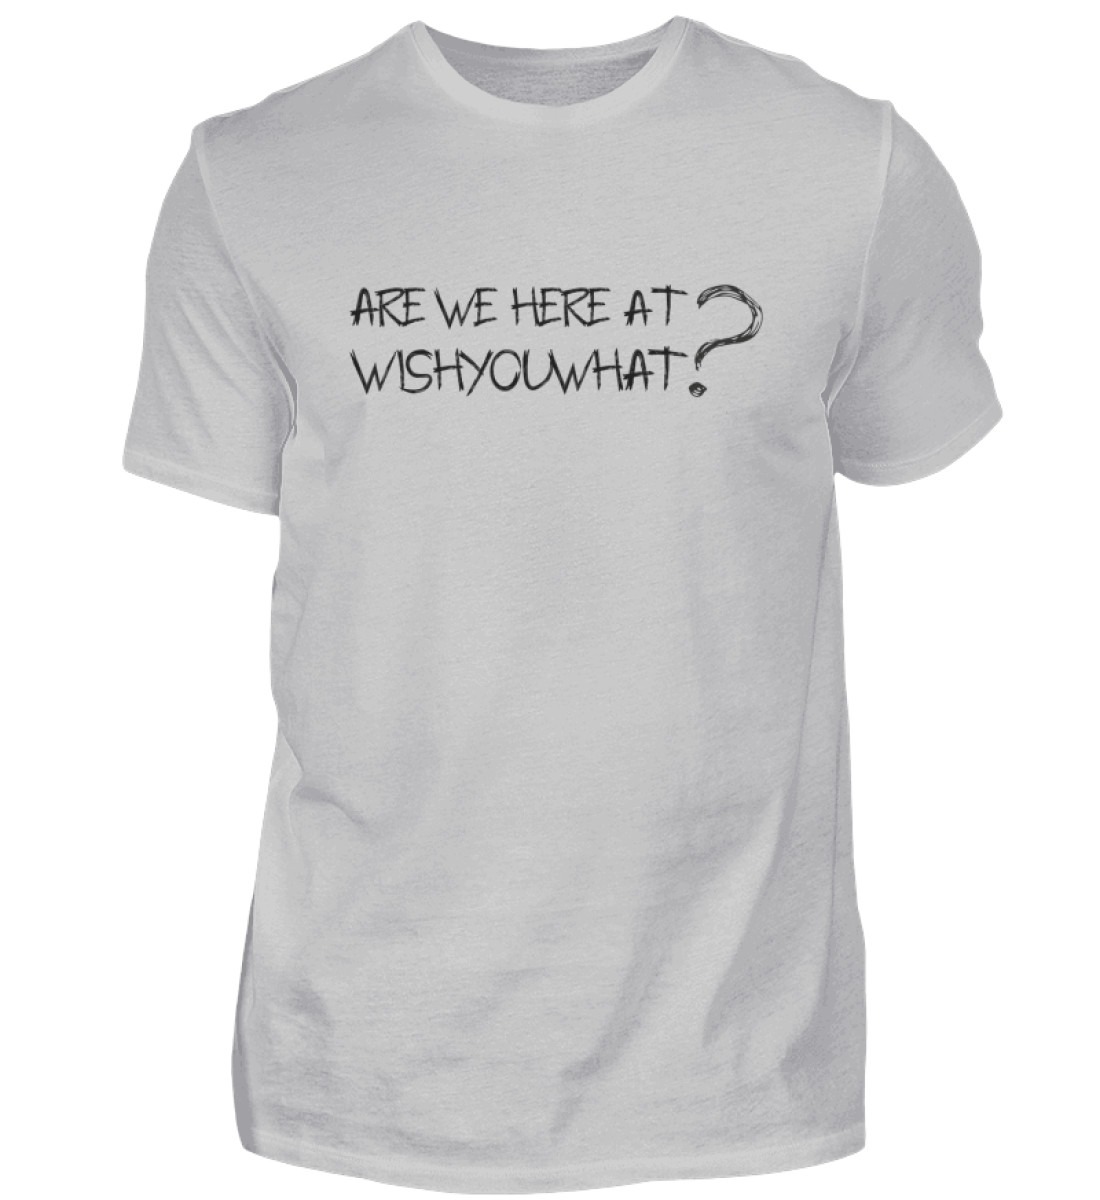 ARE WE HERE AT WISHYOUWHAT? - Herren Shirt-1157